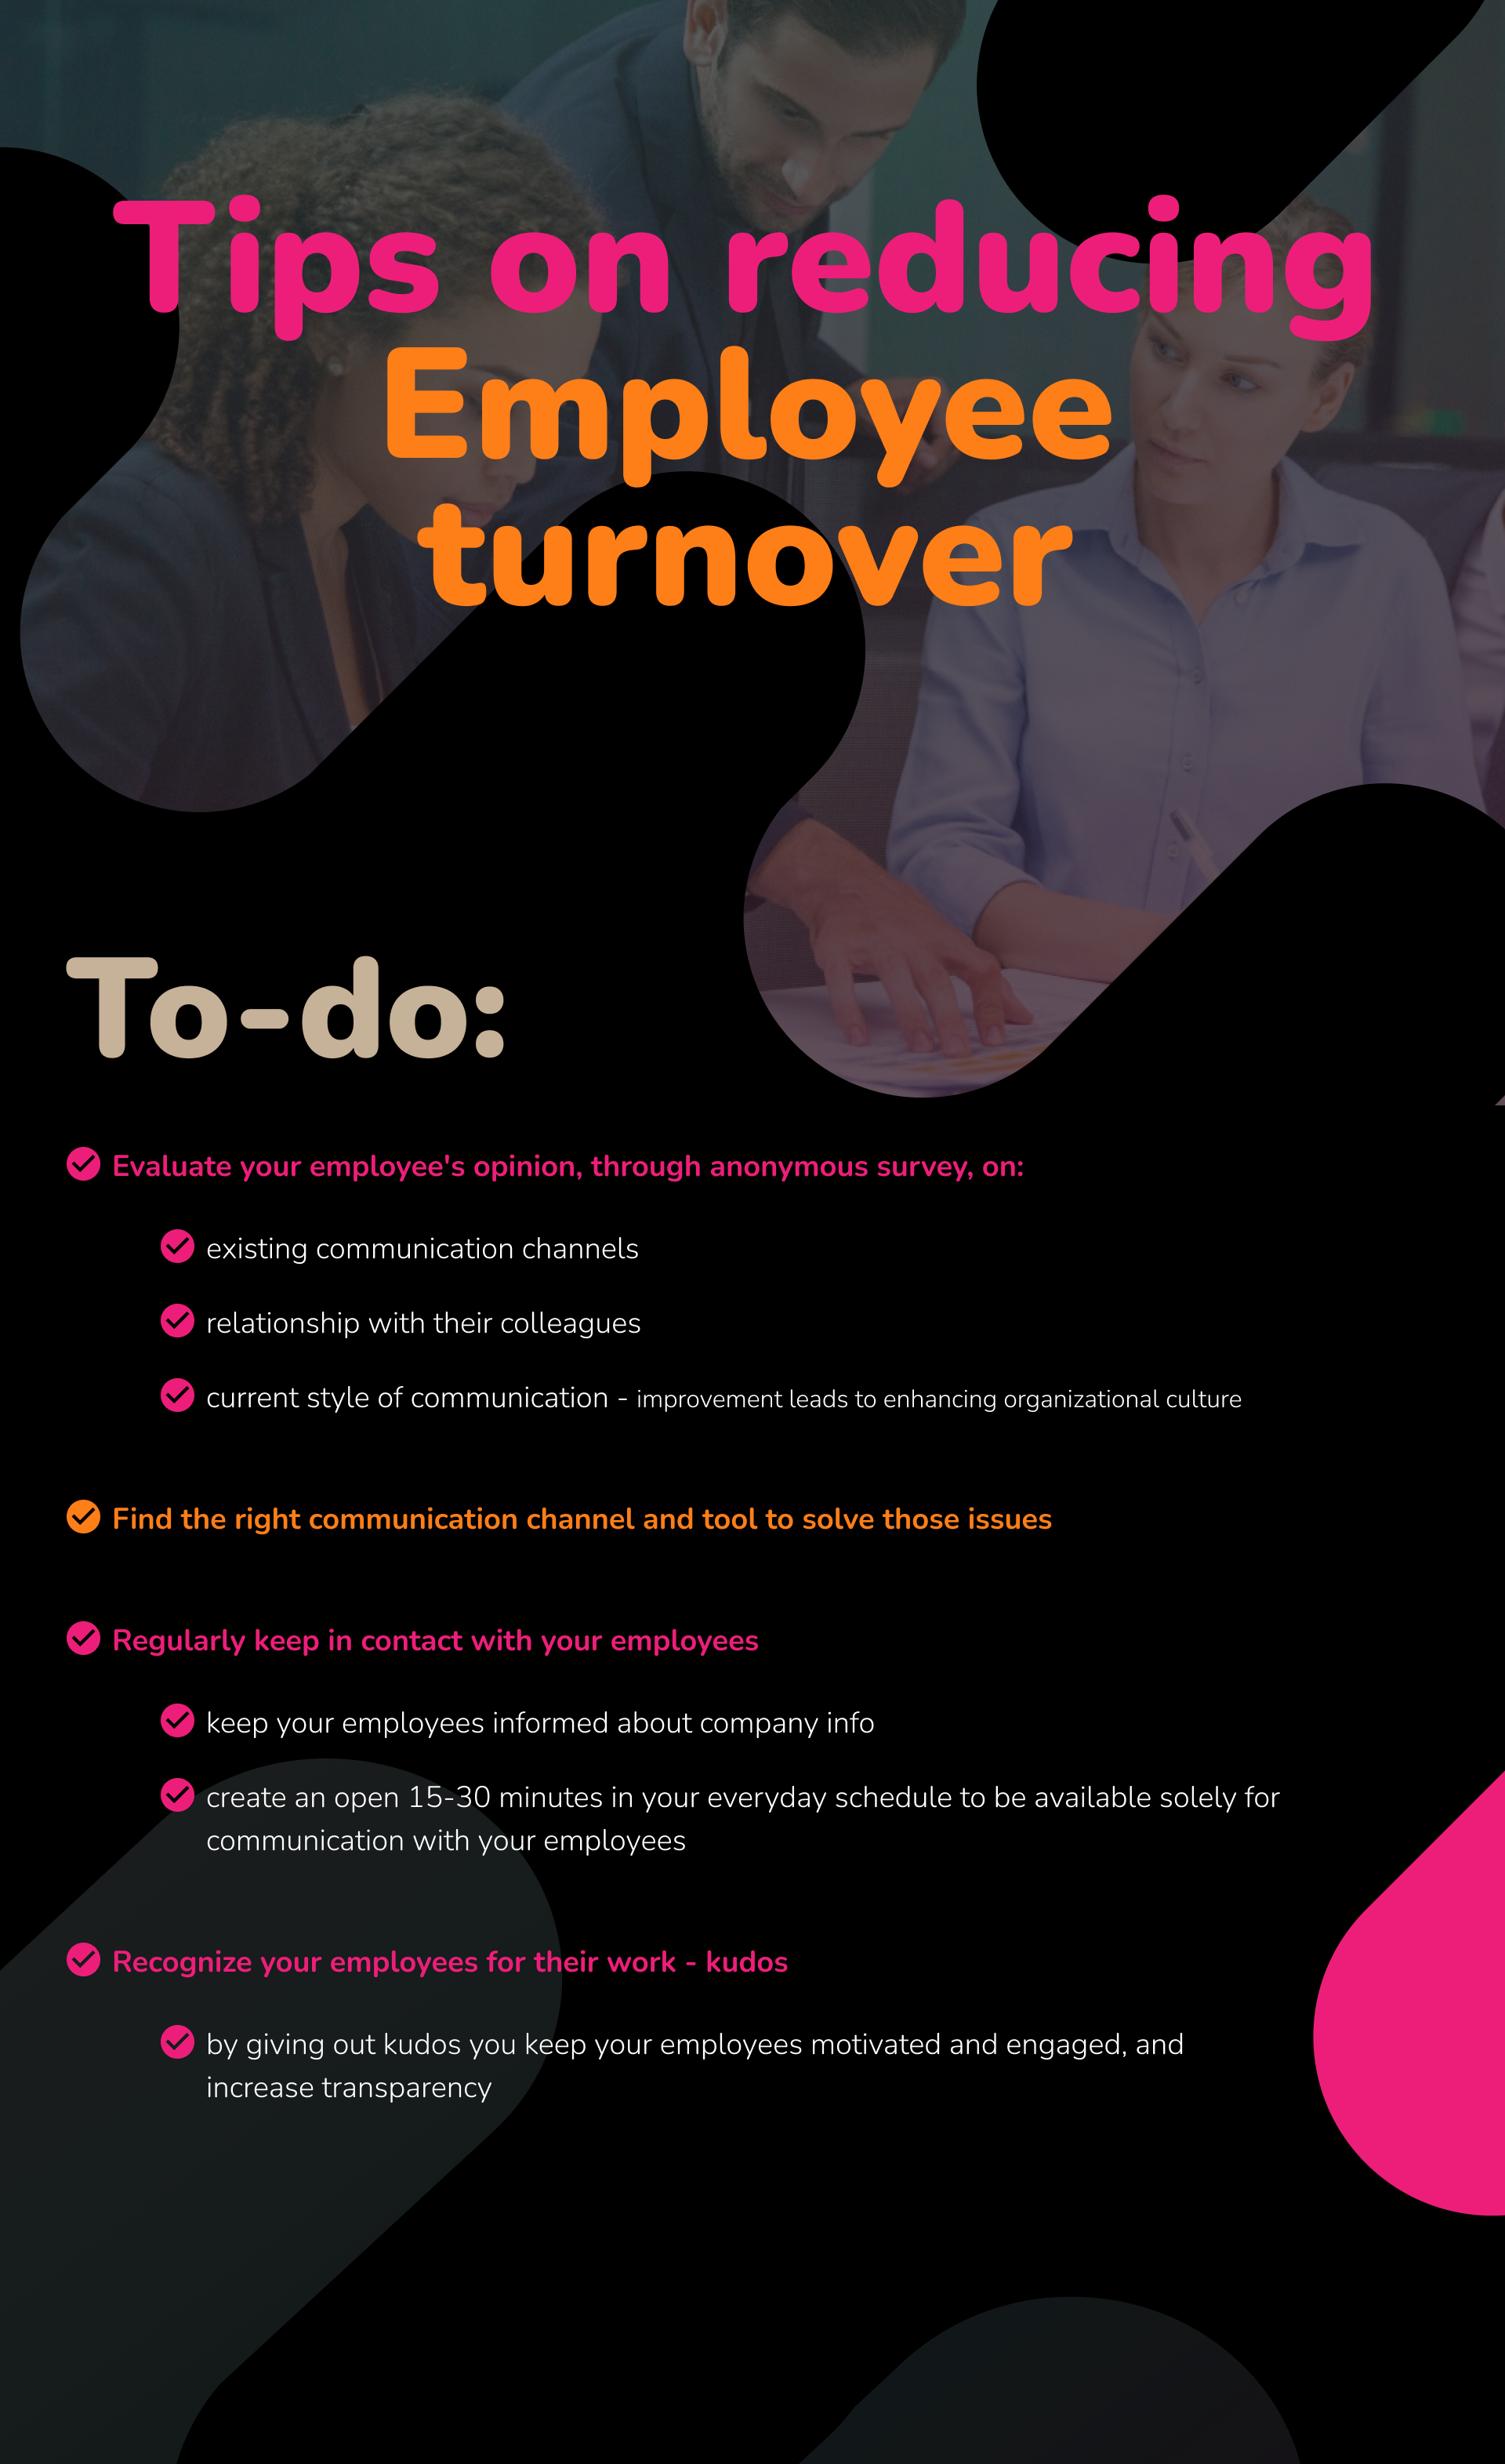 Tips on reducing employee turnover.